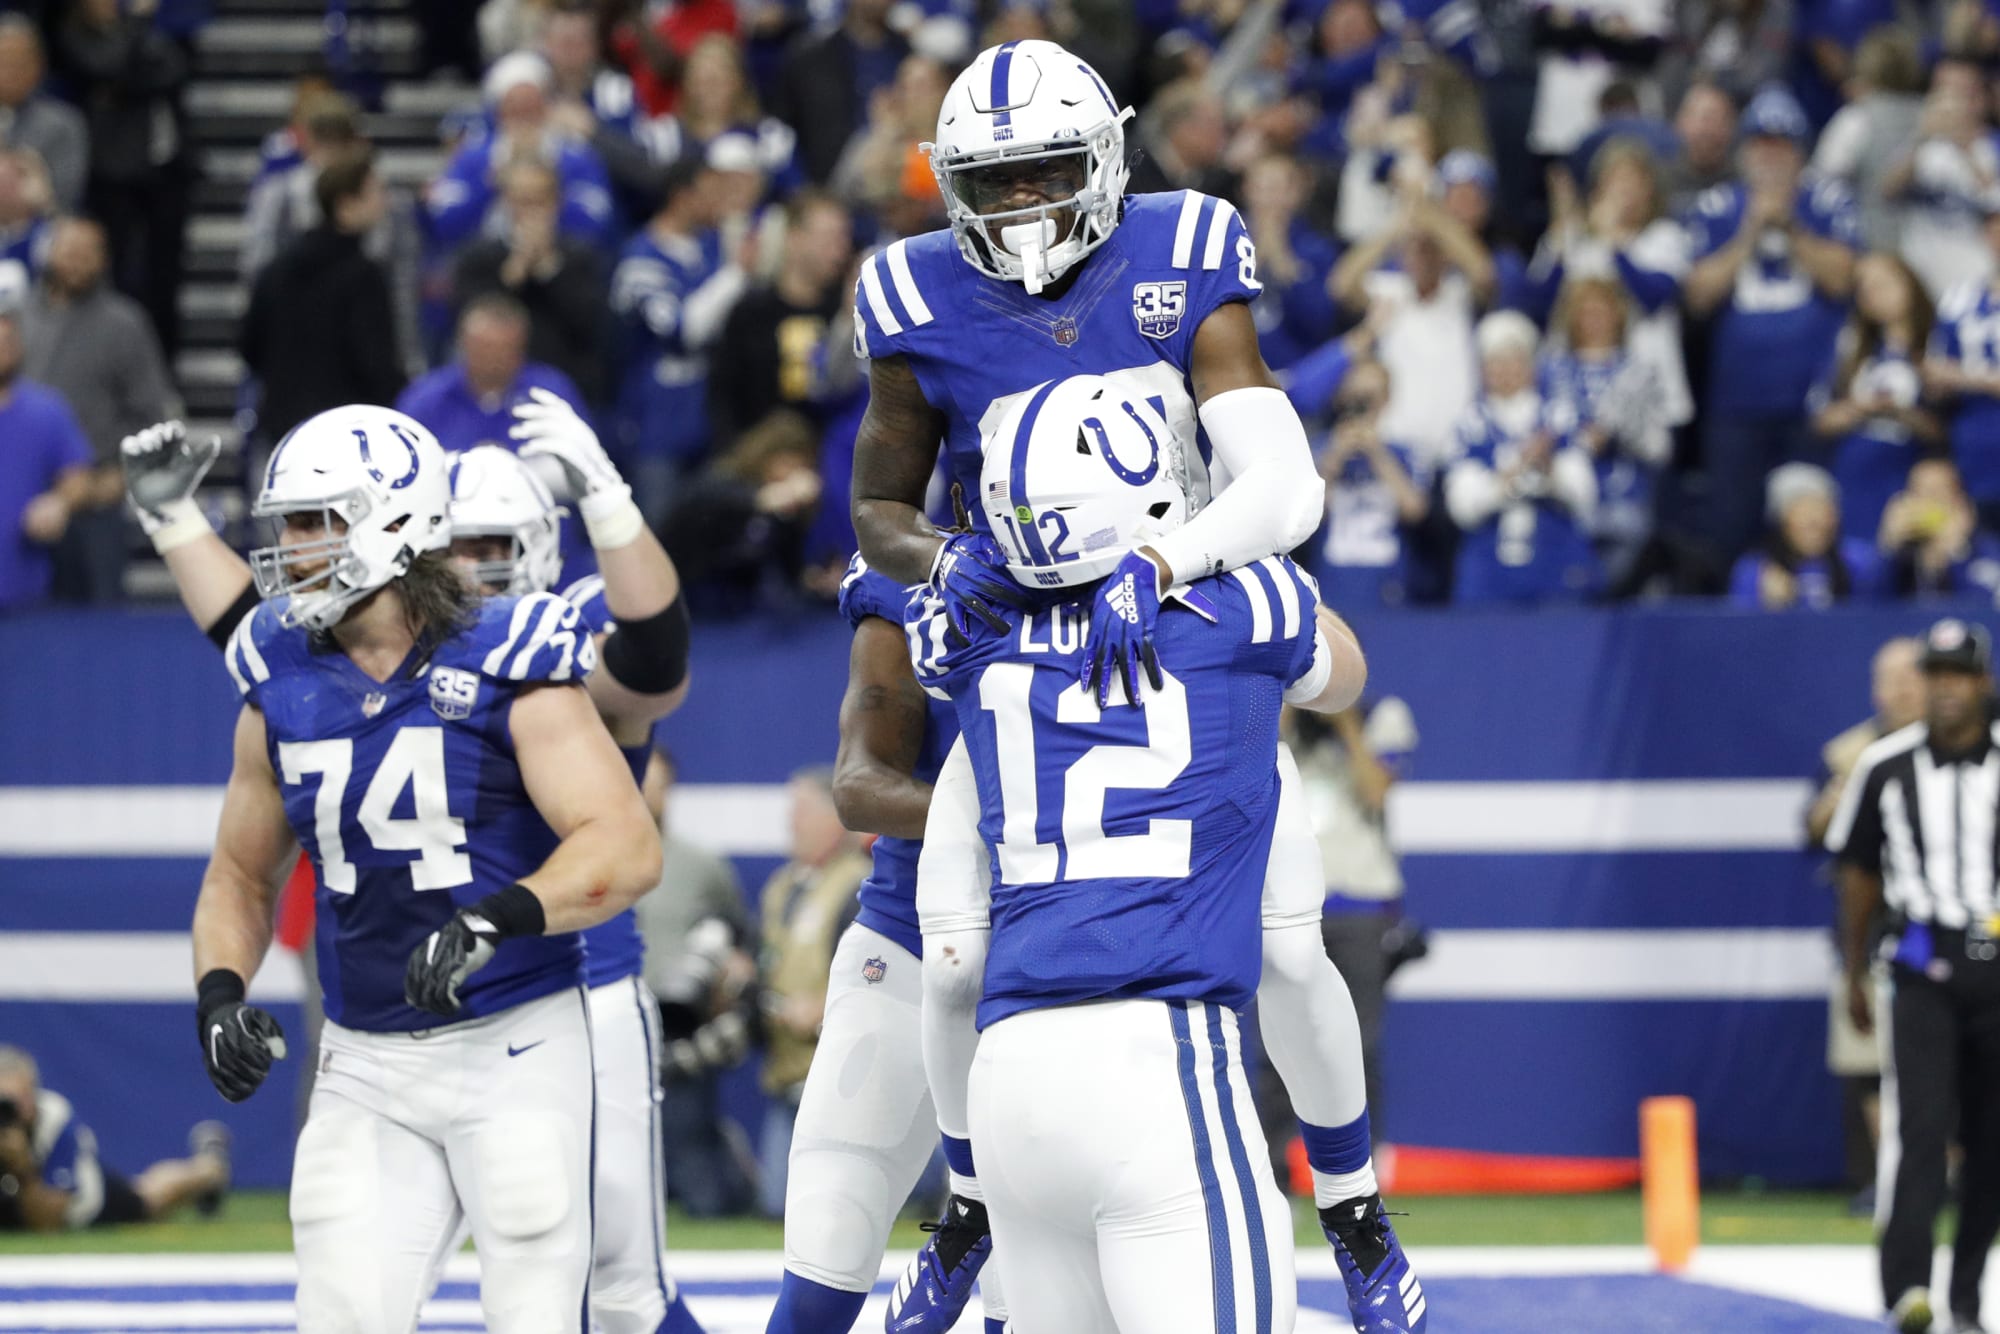 The Colts are one win away from the playoffs